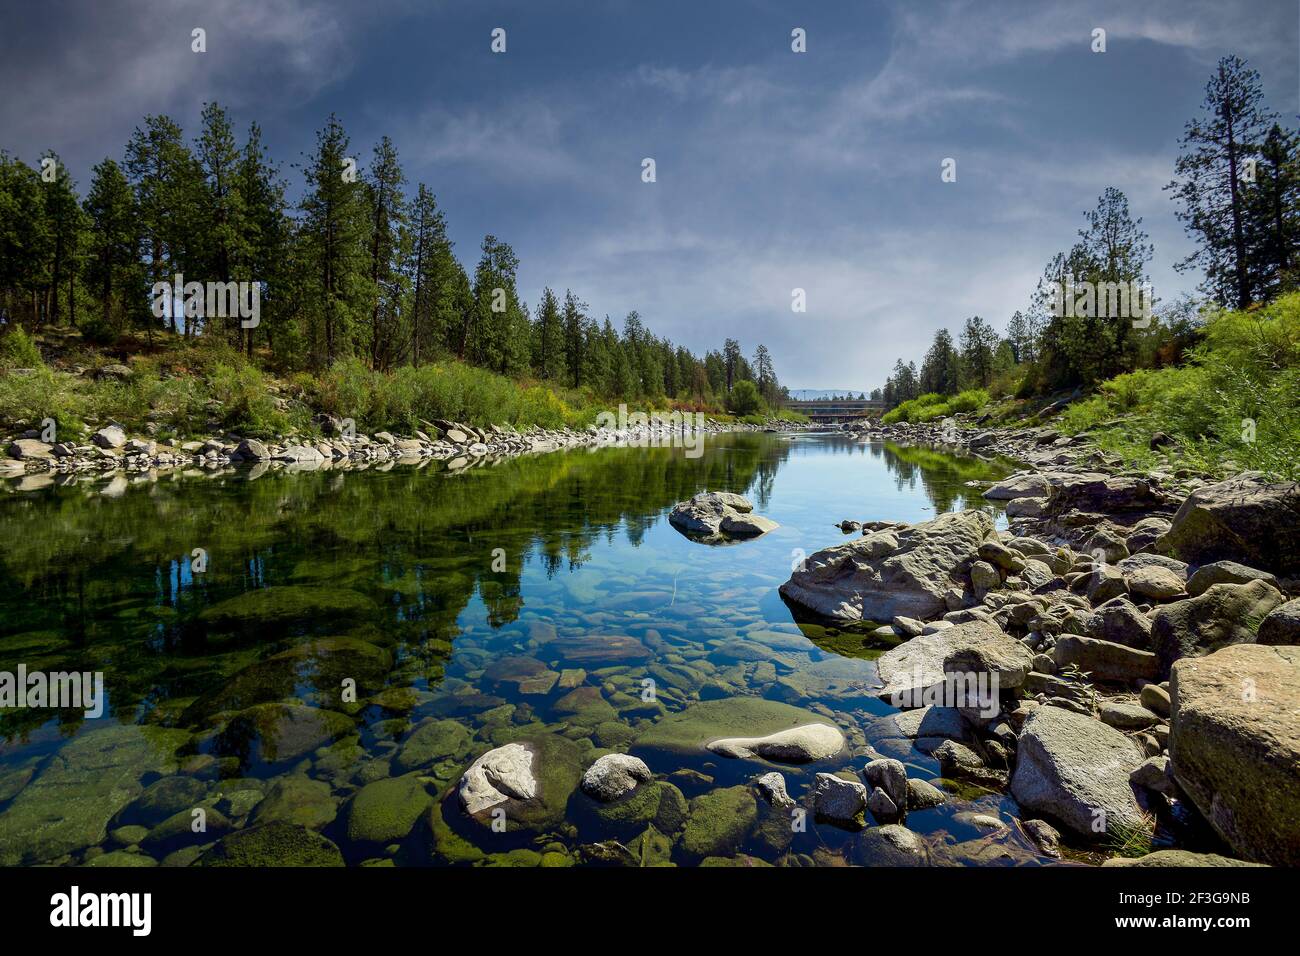 Calm river with transparent water flowing near green coniferous trees against cloudy blue sky in countryside Stock Photo